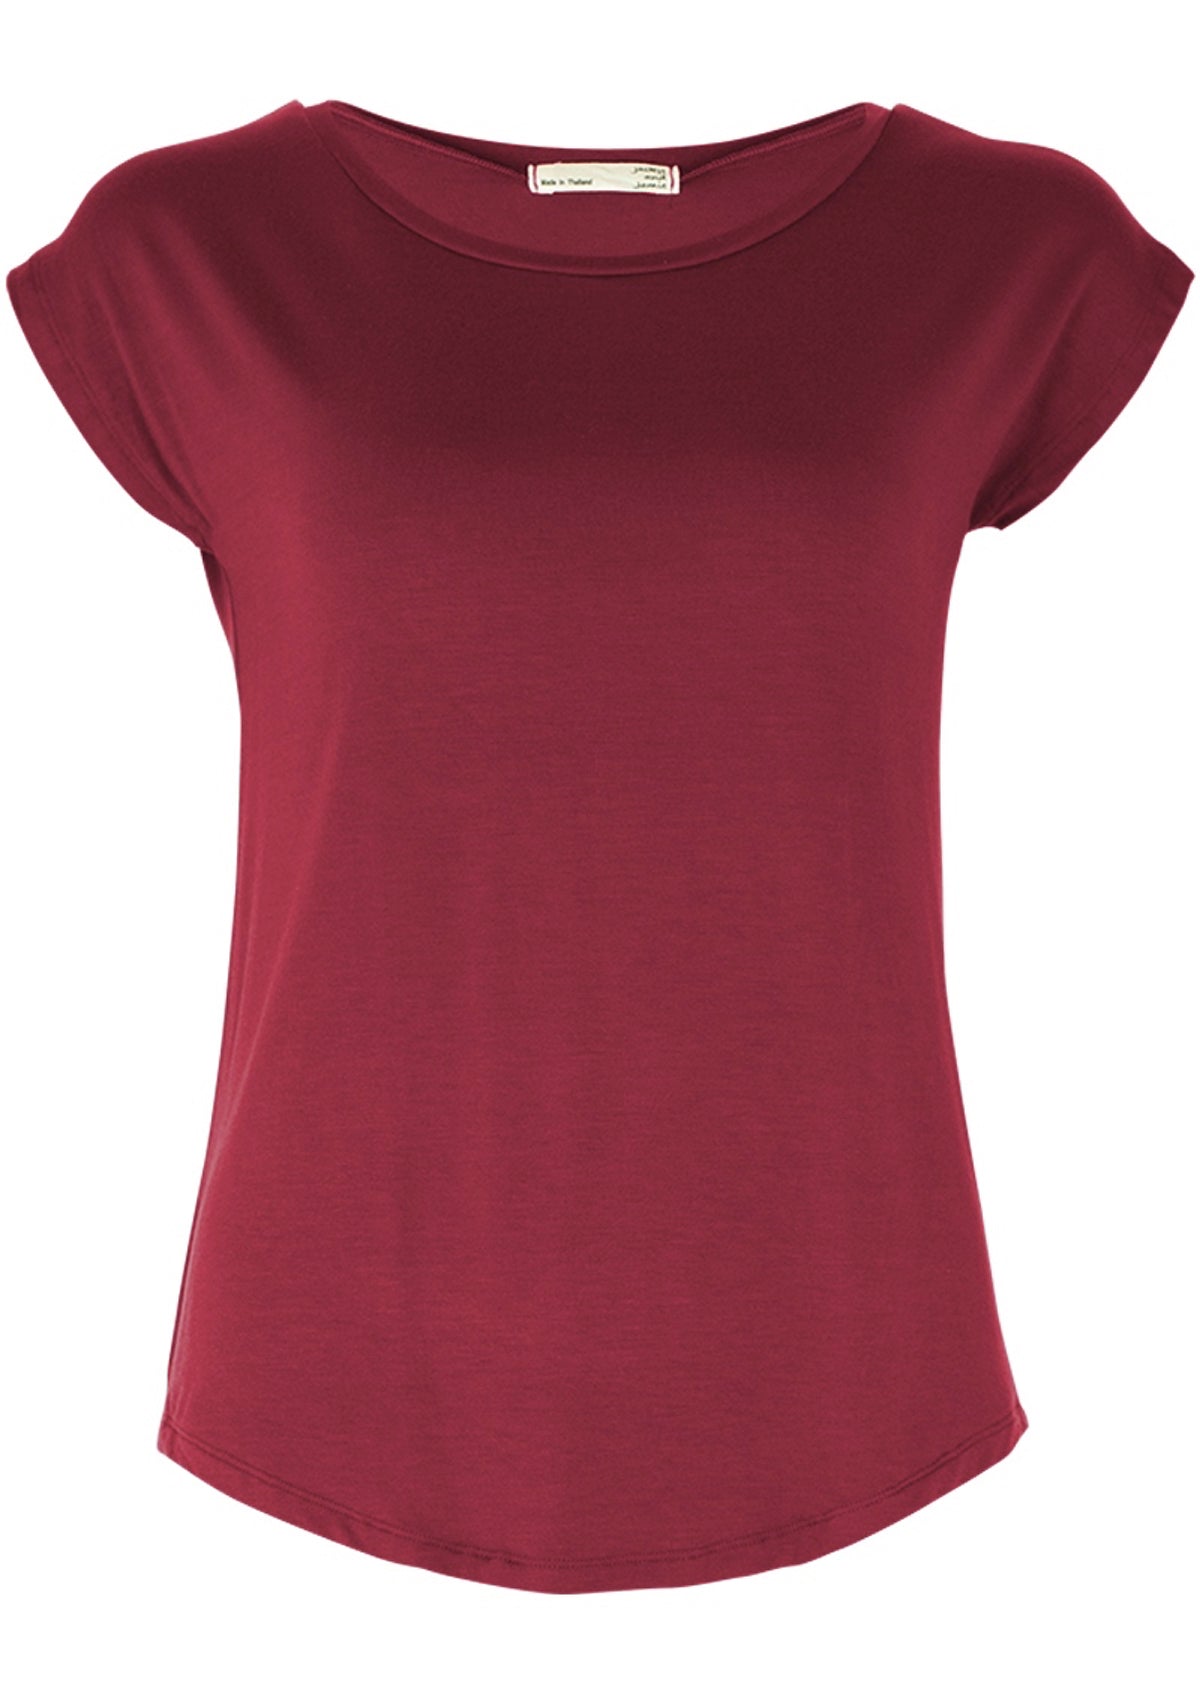 Front view of maroon rayon jersey t-shirt.